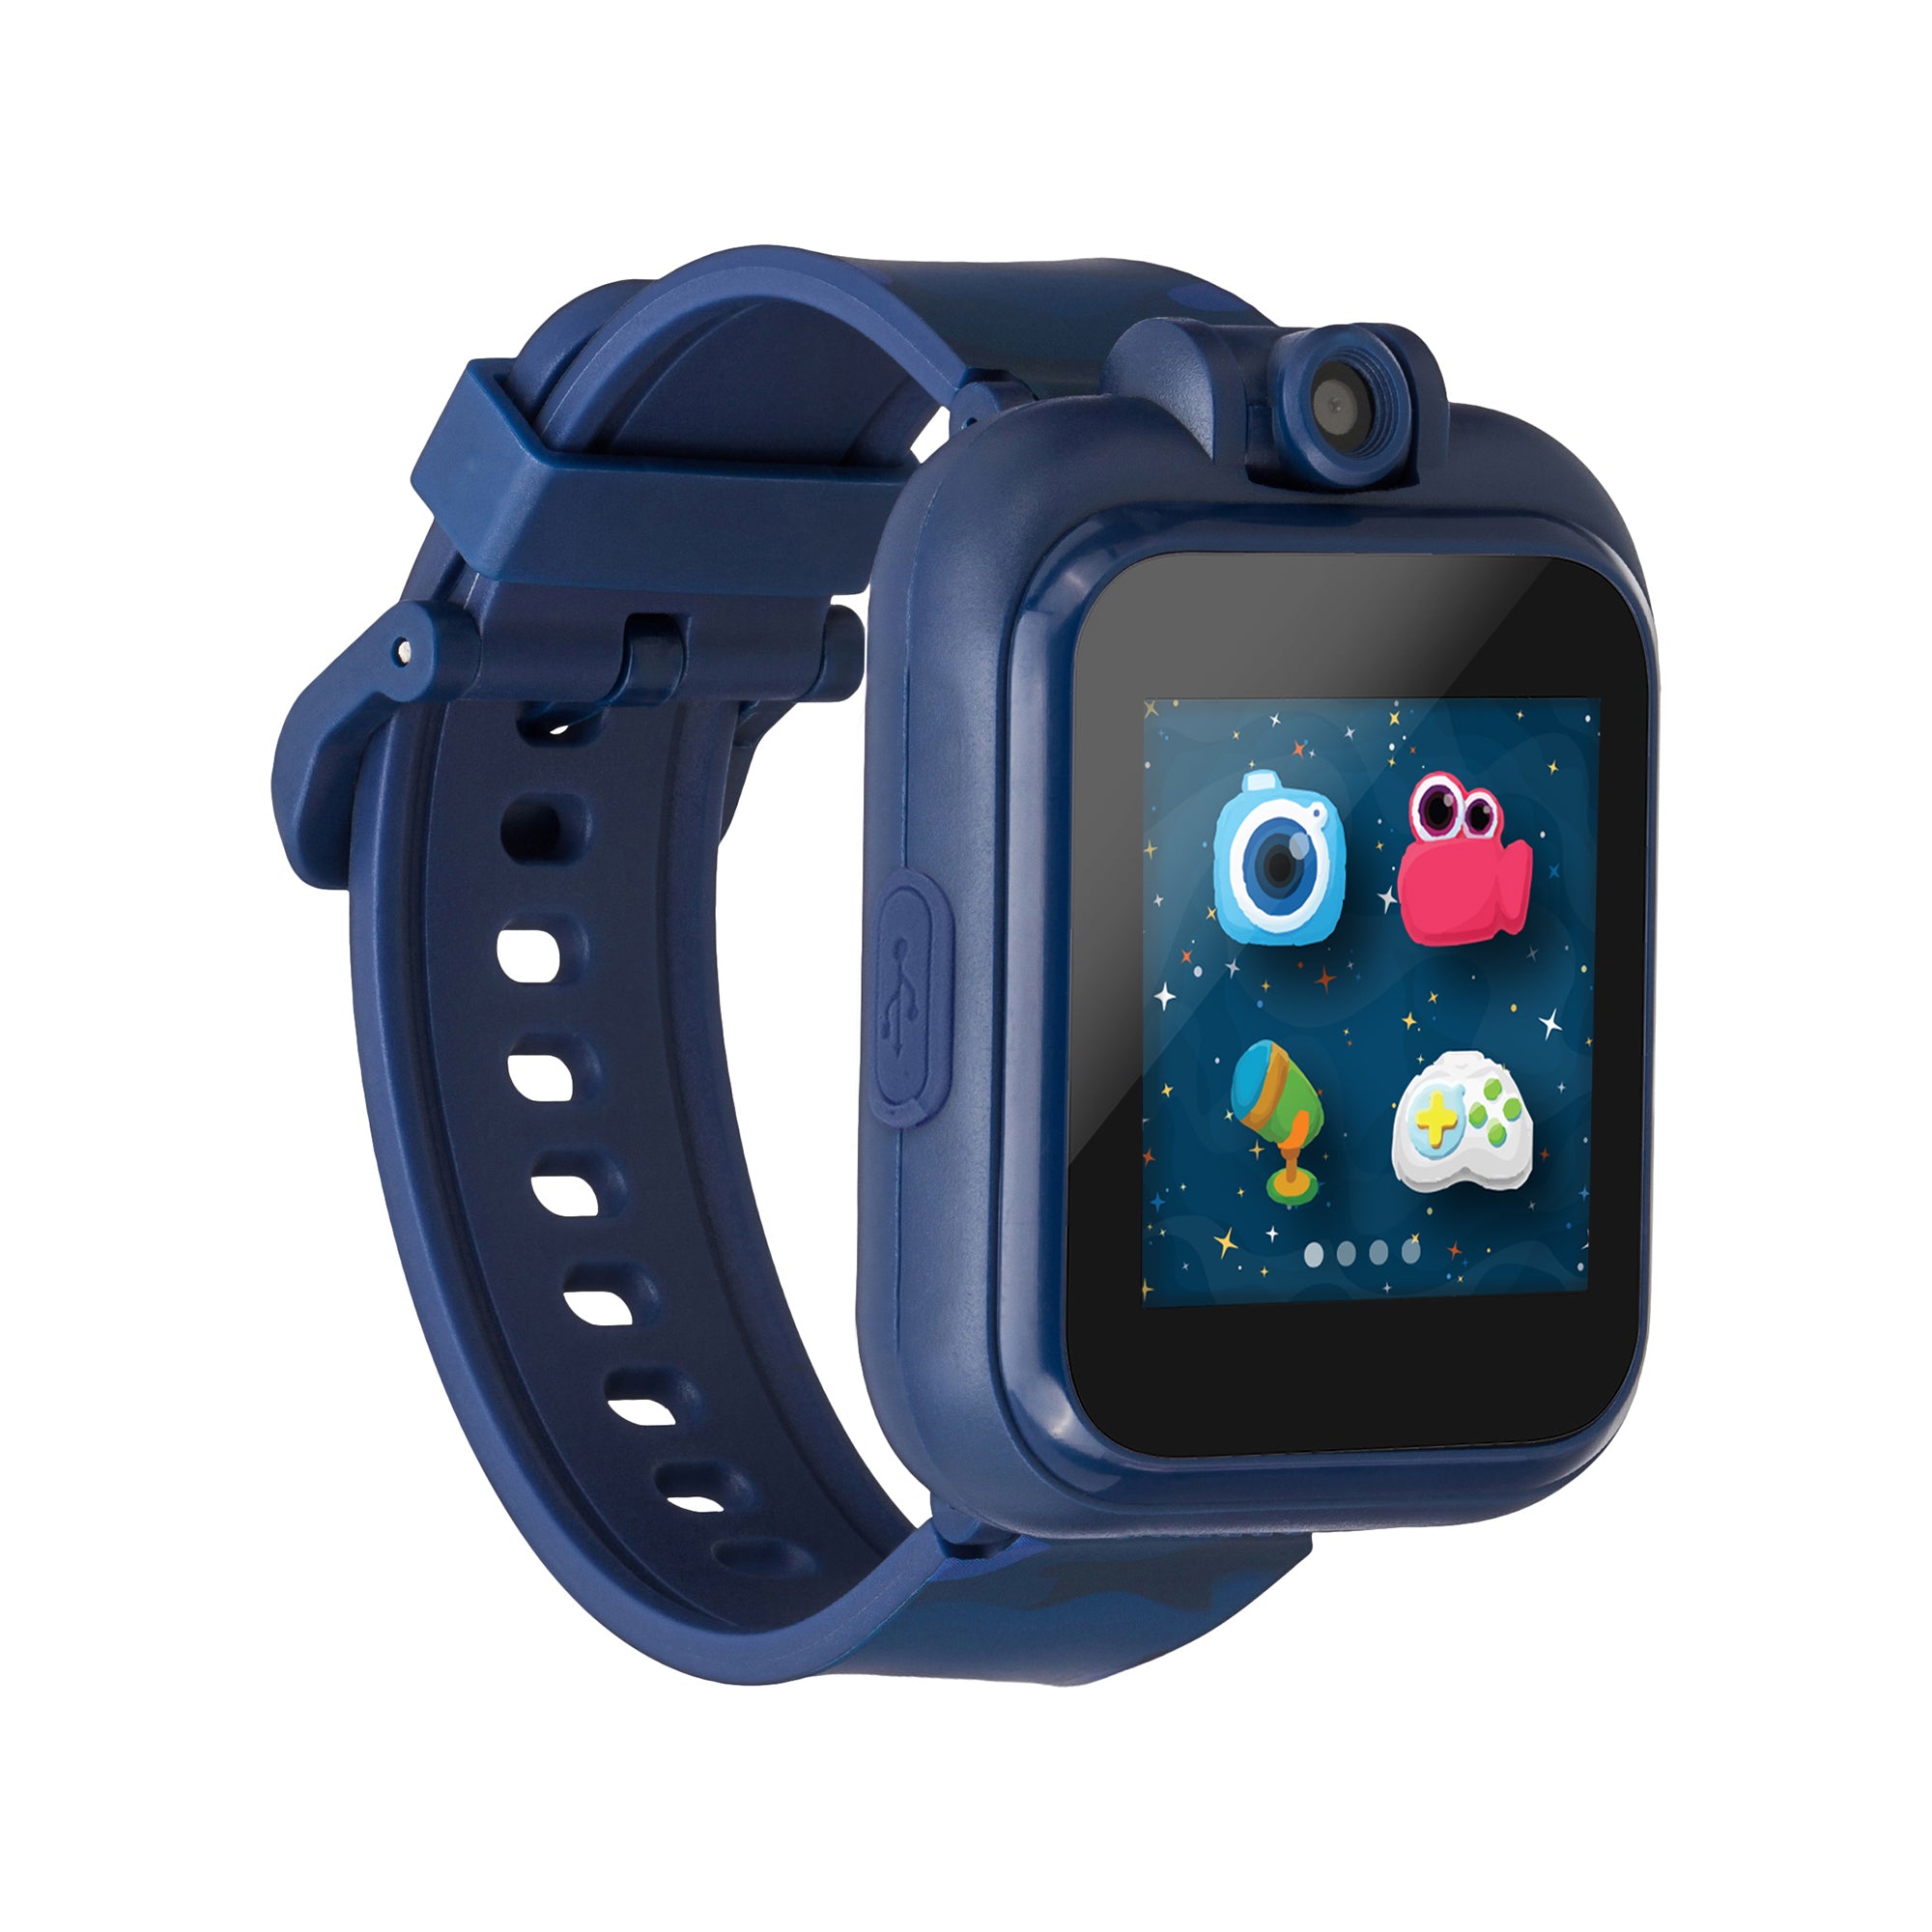 PlayZoom Smartwatch for Kids: Blue Camo affordable smart watch